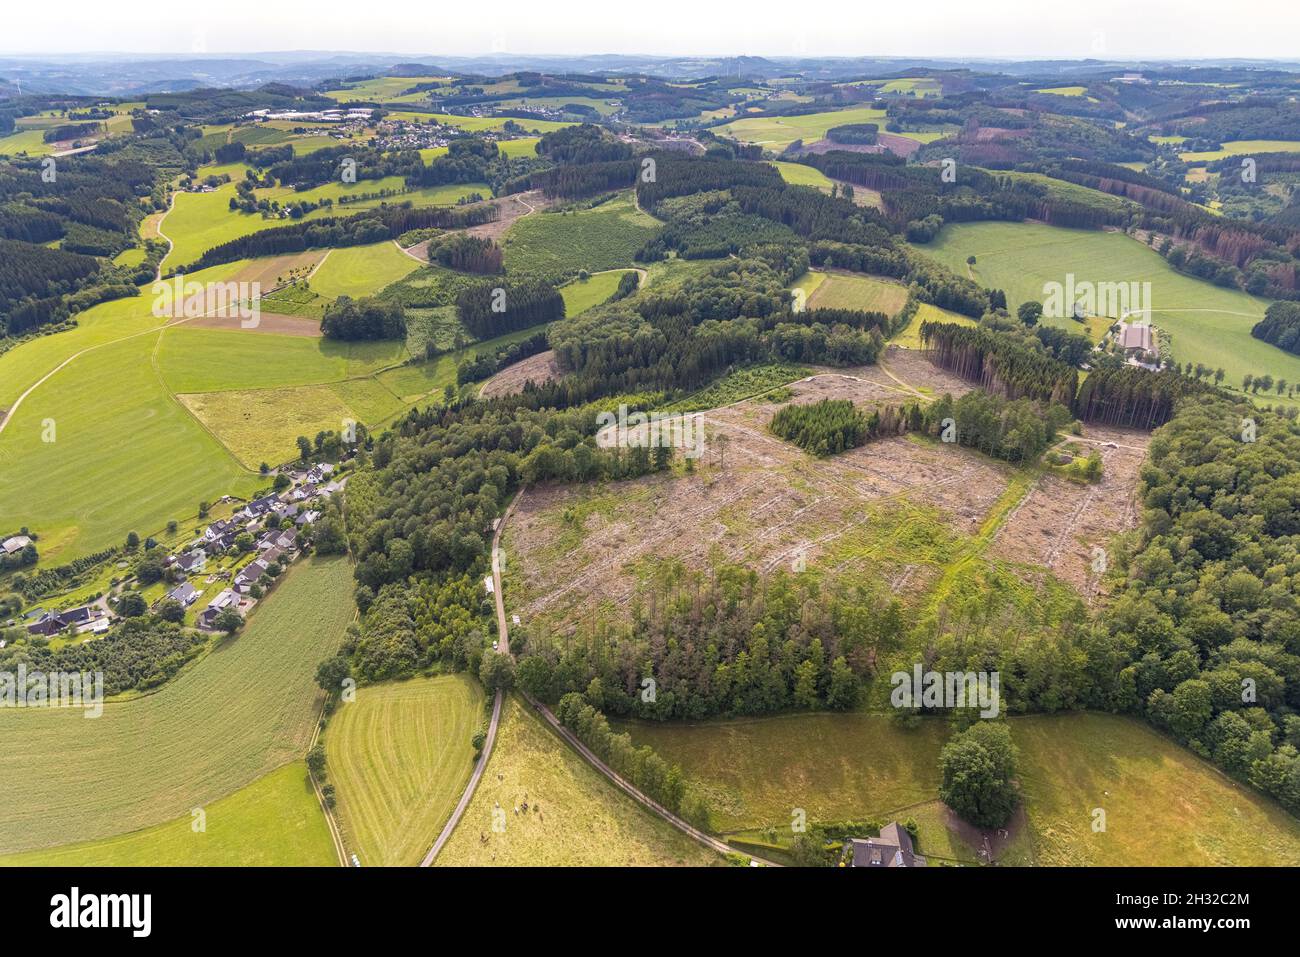 Aerial photograph, forest area with forest damage in Heimicke, Drolshagen, Sauerland, North Rhine-Westphalia, Germany, tree death, bark beetle damage, Stock Photo